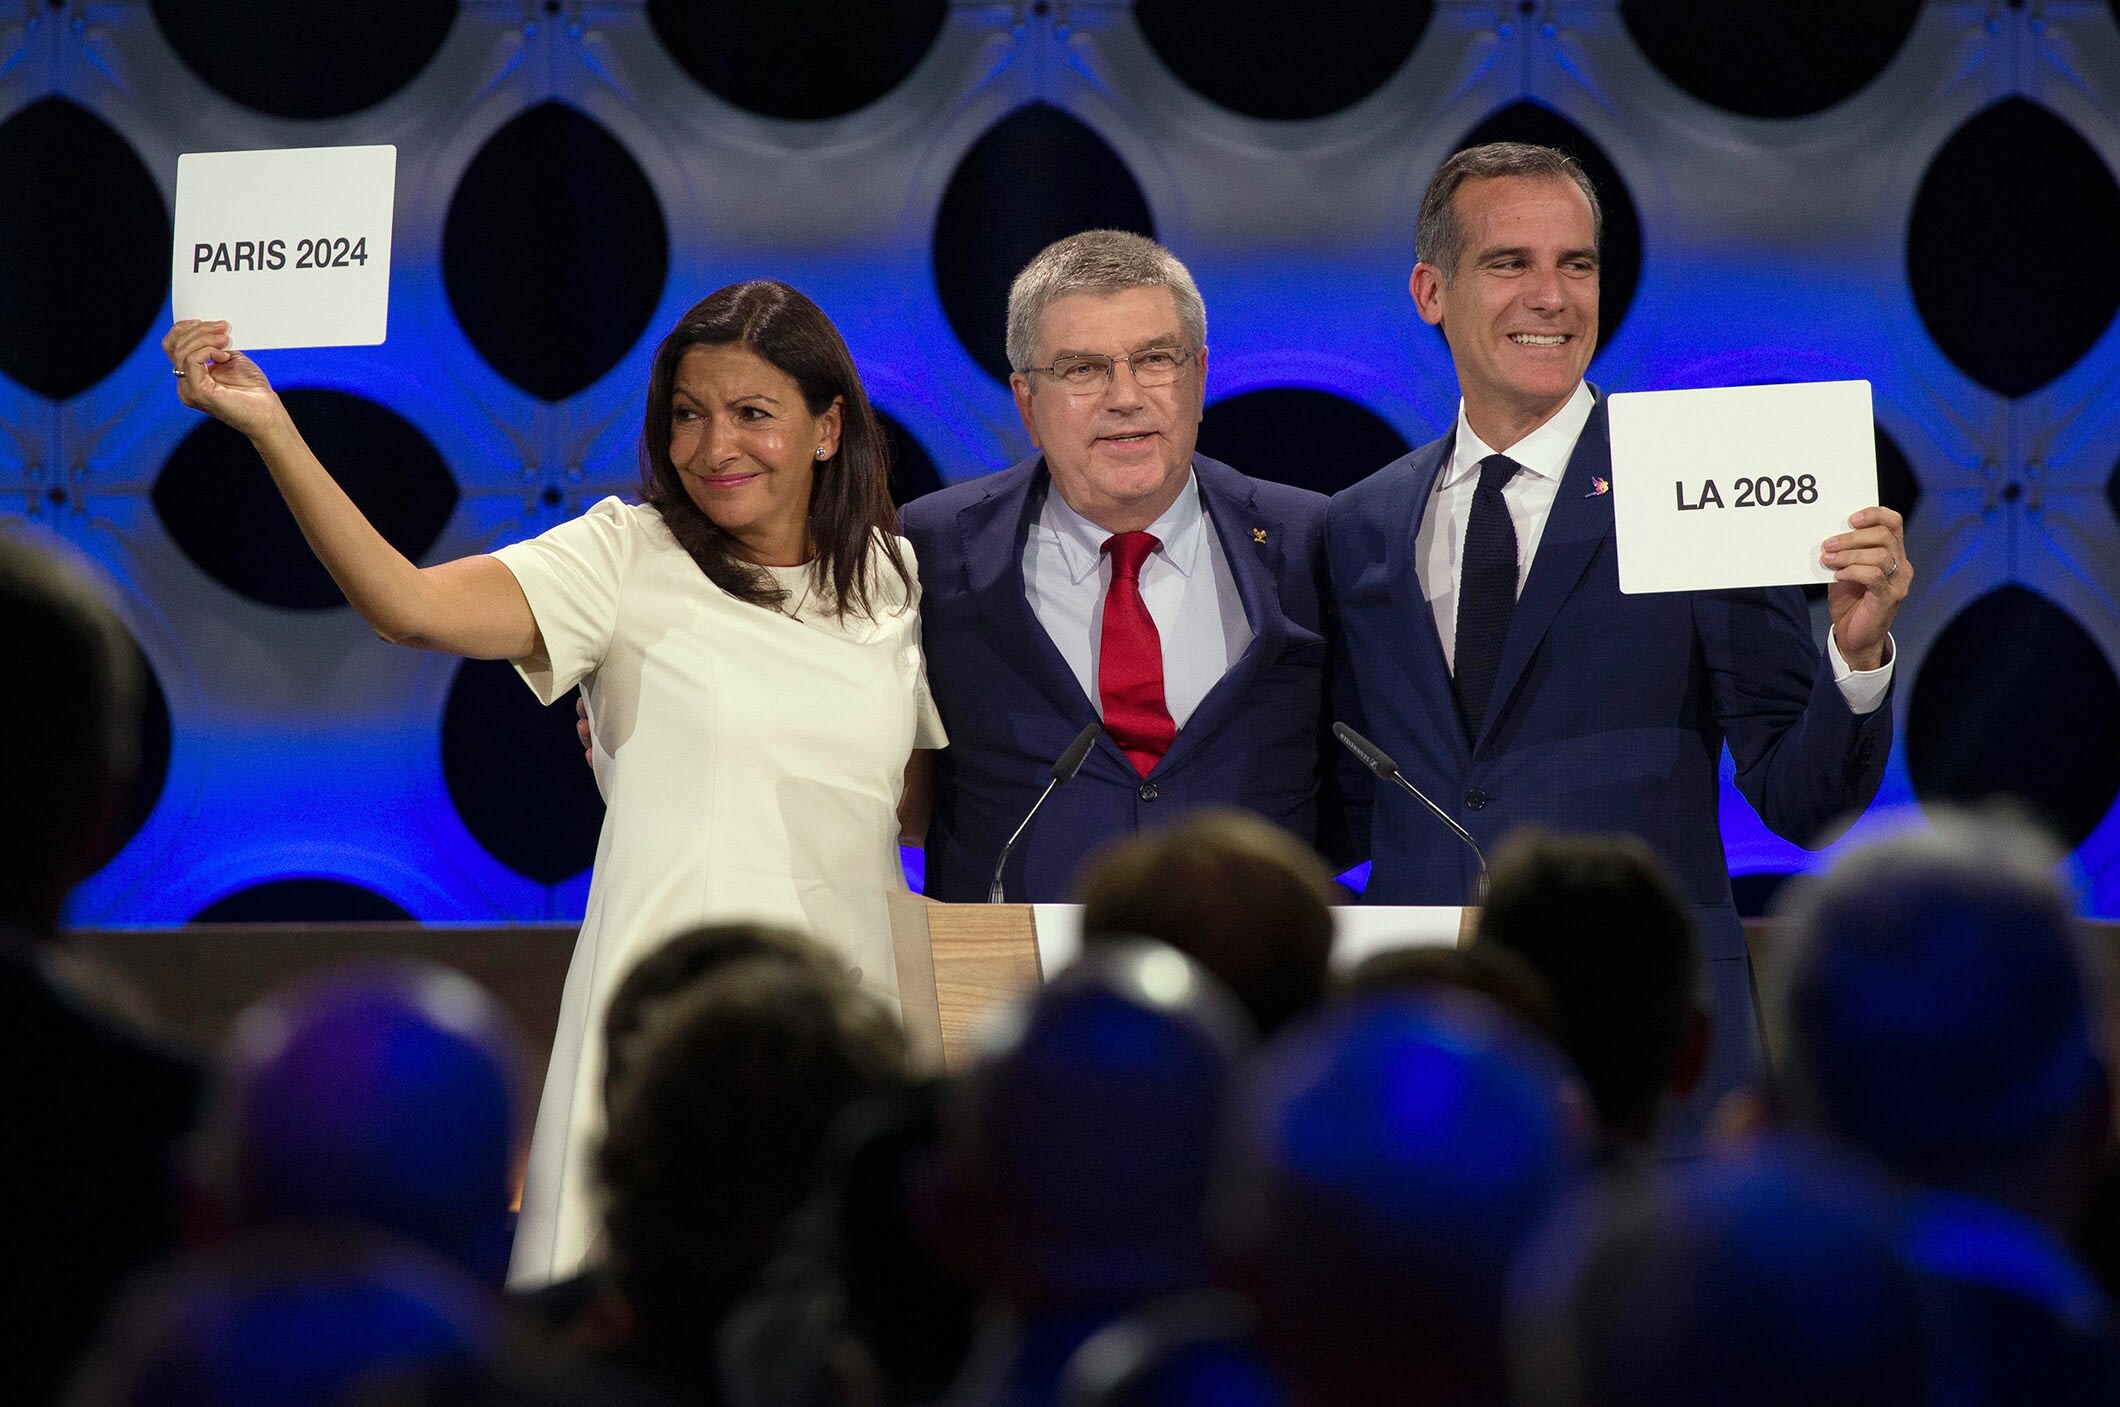 131ST IOC SESSION, LIMA, 2017 - THOMAS BACH, IOC PRESIDENT ANNOUNCES PARIS, HOST CITY OF THE 2024 OLYMPIC SUMMER GAMES AND LOS ANGELES, HOST CITY OF THE 2028 OLYMPIC SUMMER GAMES. ON THE LEFT, ANNE HIDALGO AND ON THE RIGHT, ERIC GARCETTI, BOTH ARE MAYORS OF THEIR RESPECTIVE CITIES. © 2017 / COMITÉ INTERNATIONAL OLYMPIQUE(CIO) / GREG MARTIN